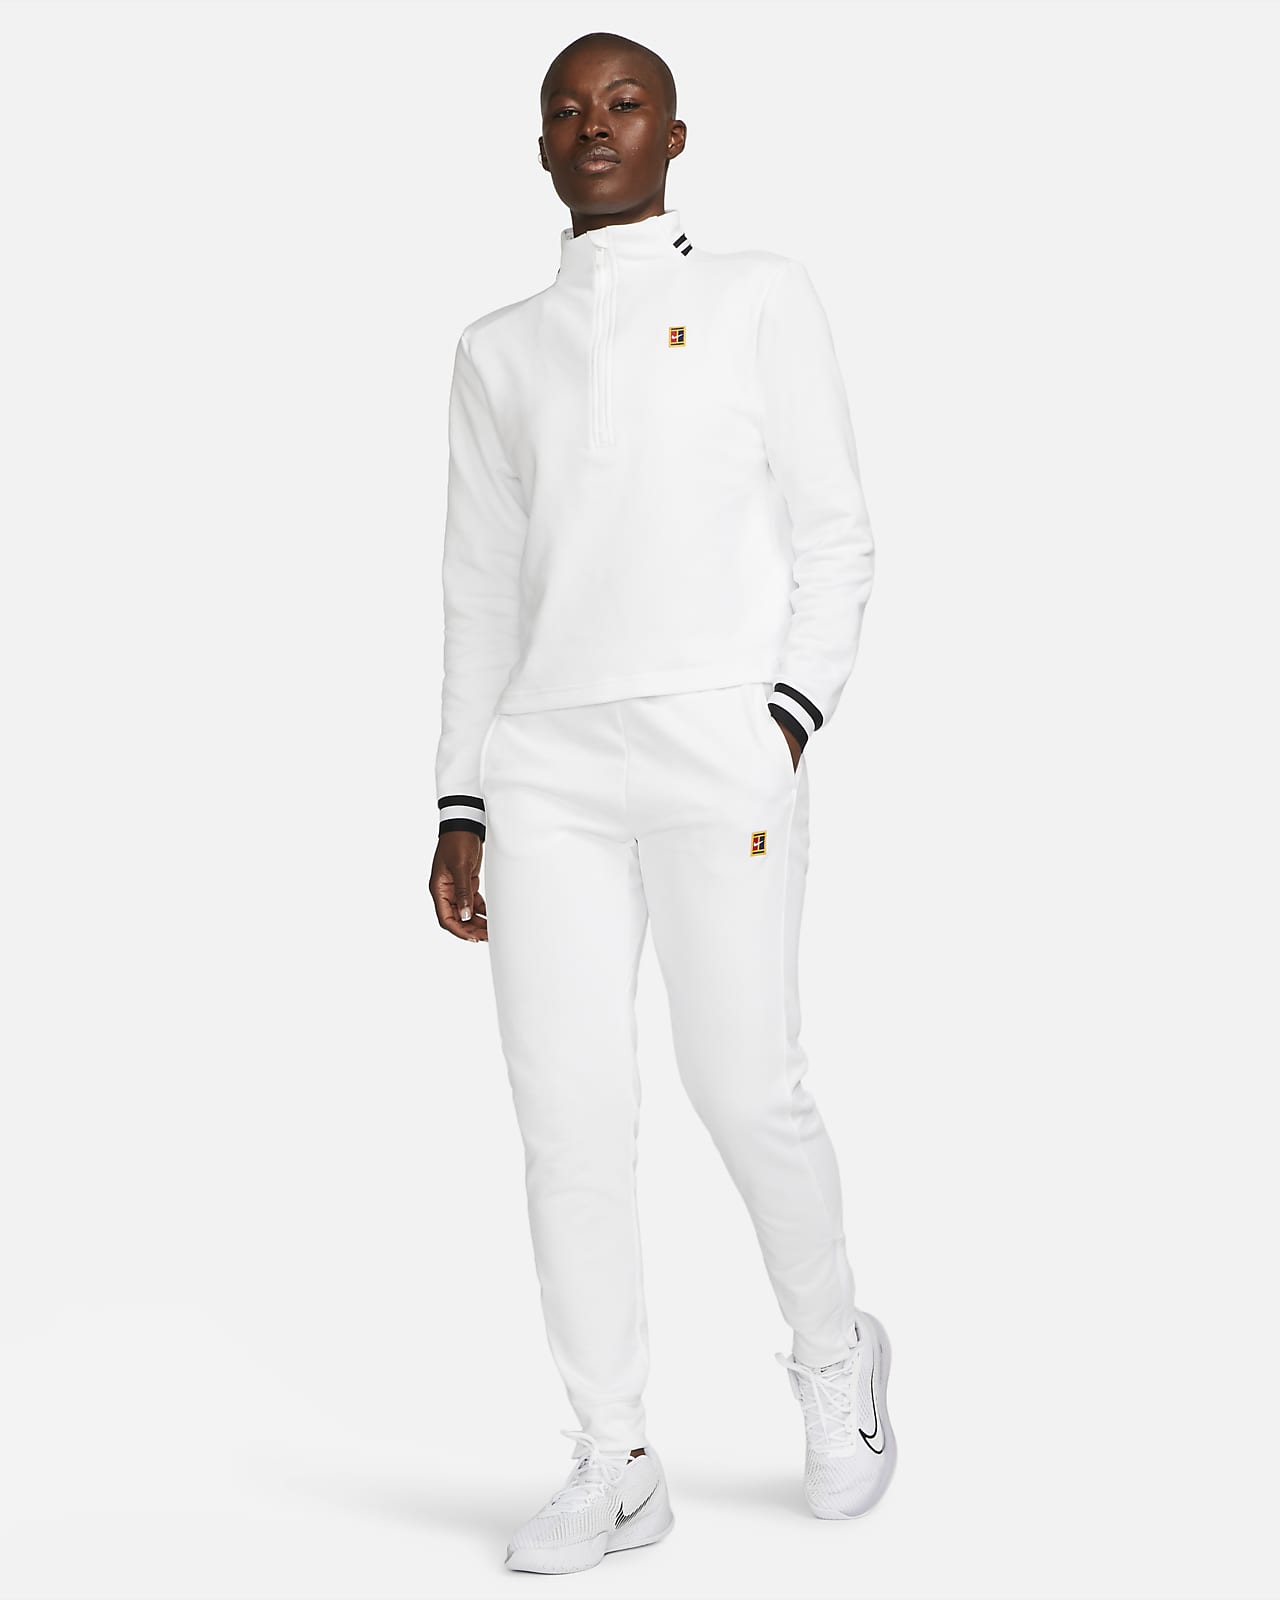 NikeCourt Dri-FIT Heritage Women's French Terry Tennis Trousers. Nike BE